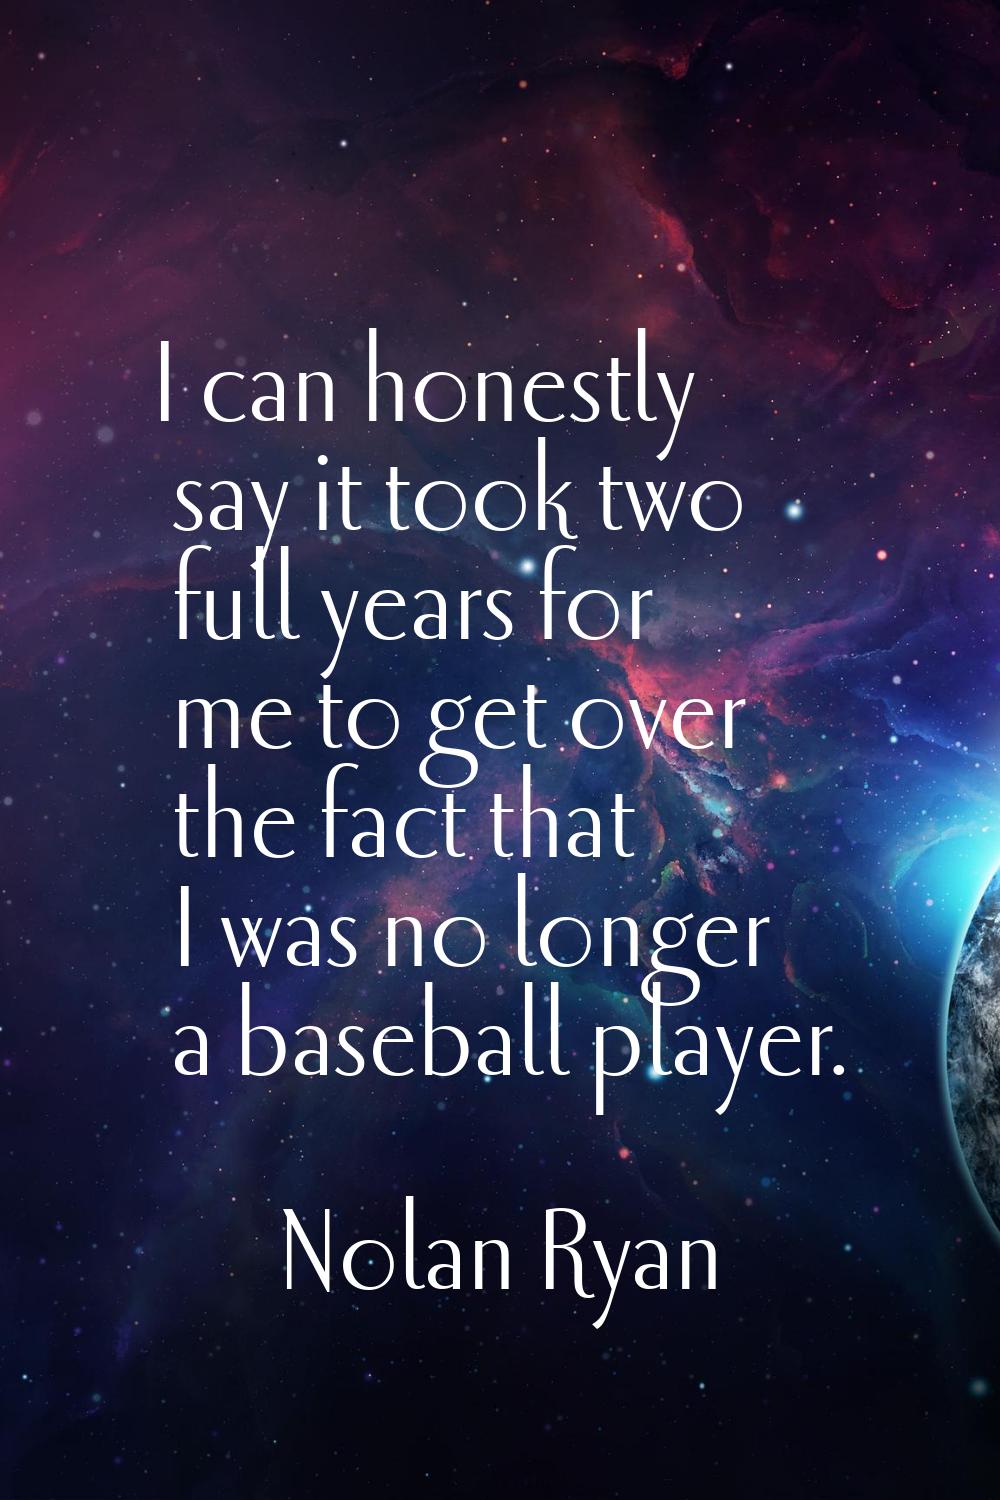 I can honestly say it took two full years for me to get over the fact that I was no longer a baseba